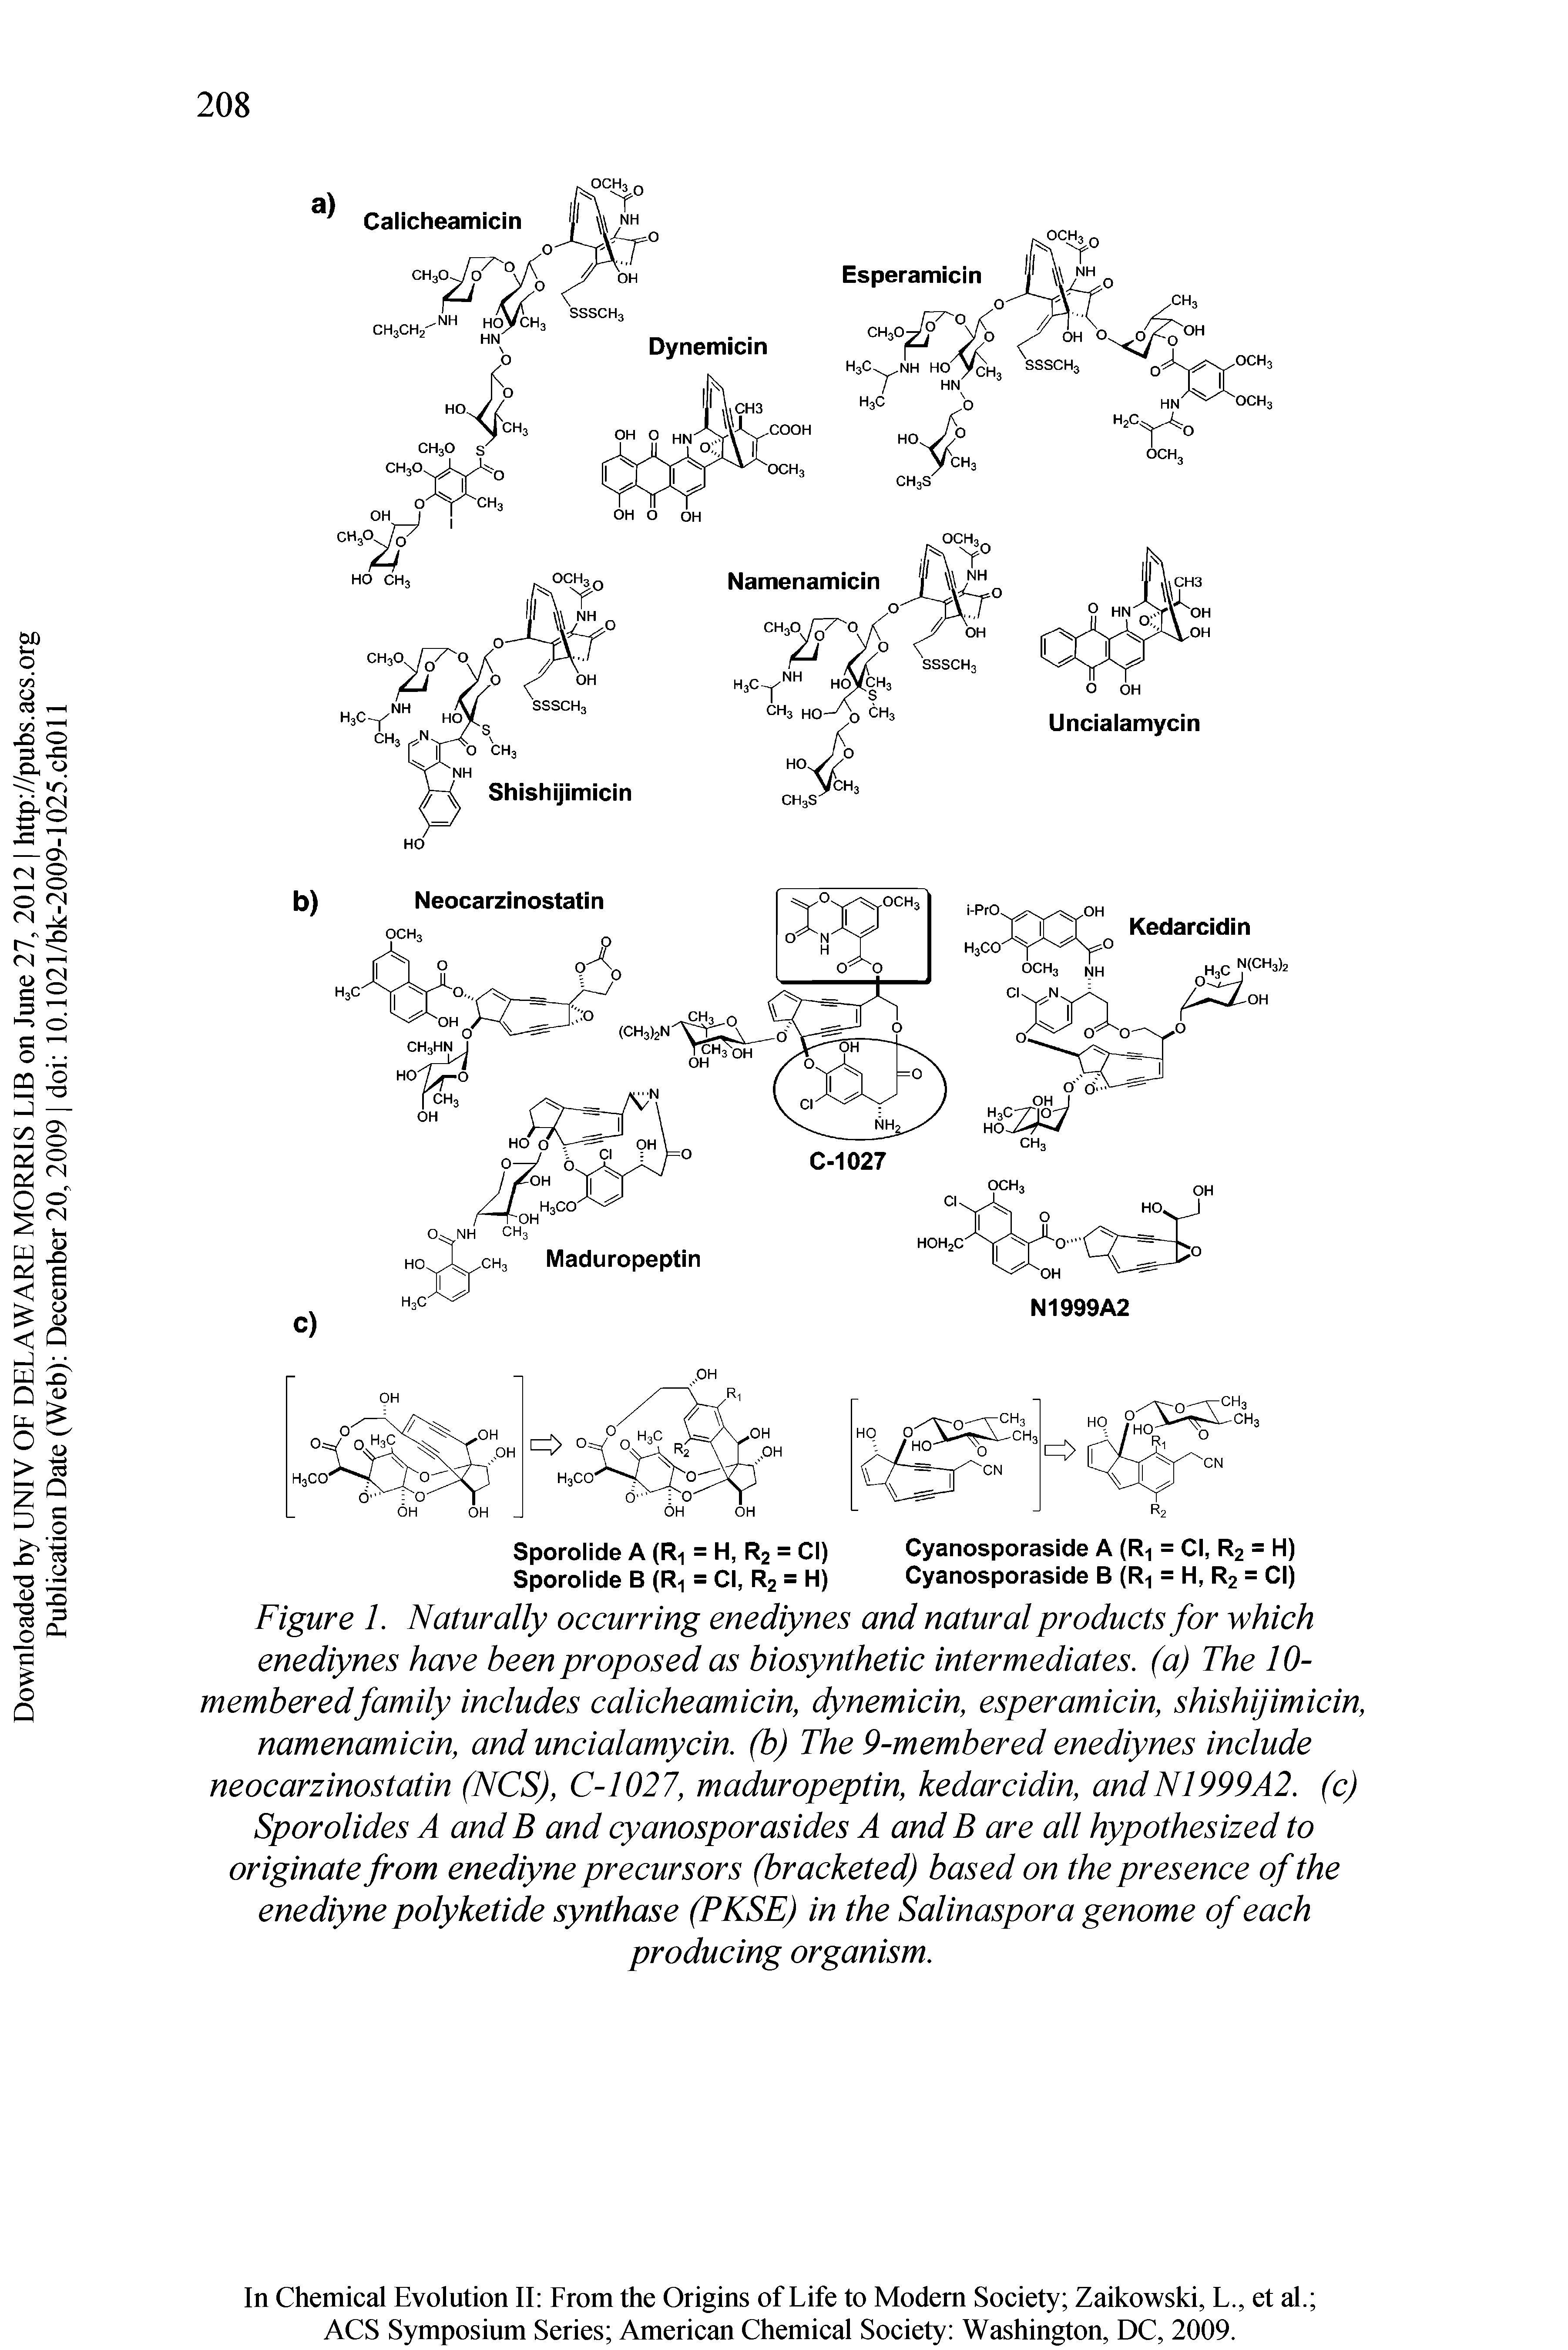 Figure 1. Naturally occurring enediynes and natural products for which enediynes have been proposed as biosynthetic intermediates, (a) The 10-memberedfamily includes calicheamicin, dynemicin, esperamicin, shishijimicin, namenamicin, and uncialamycin. (b) The 9-membered enediynes include neocarzinostatin (NCS), C-1027, maduropeptin, kedarcidin, andN1999A2. (c) Sporolides A and B and cyanosporasides A and B are all hypothesized to originate from enediyne precursors (bracketed) based on the presence of the enediyne polyketide synthase (PKSE) in the Salinaspora genome of each producing organism.